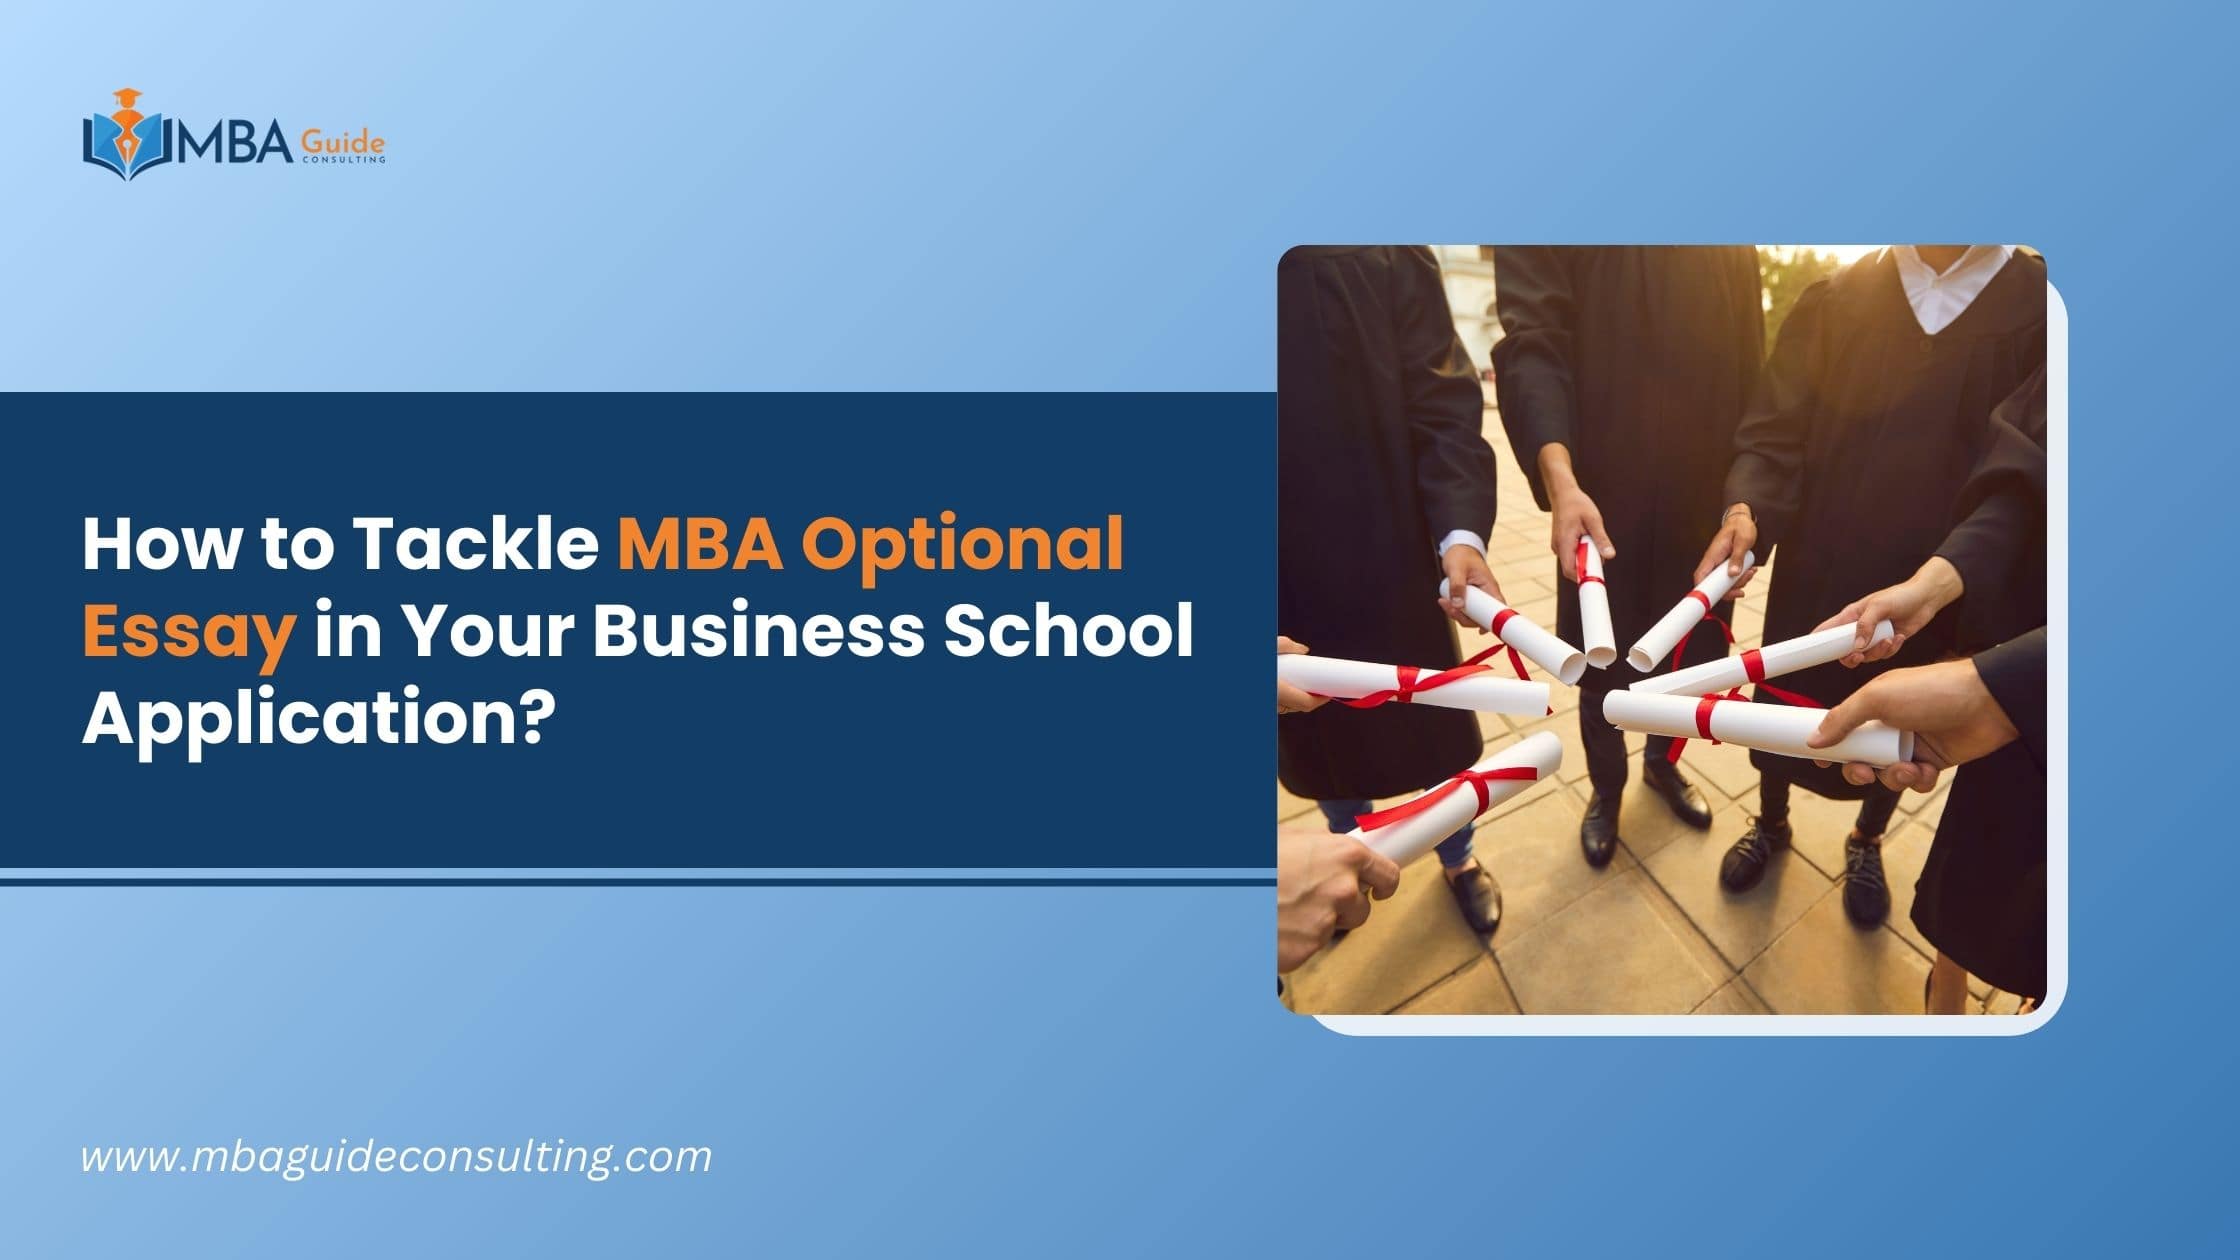 How to Tackle MBA Optional Essays in Your Business School Application?